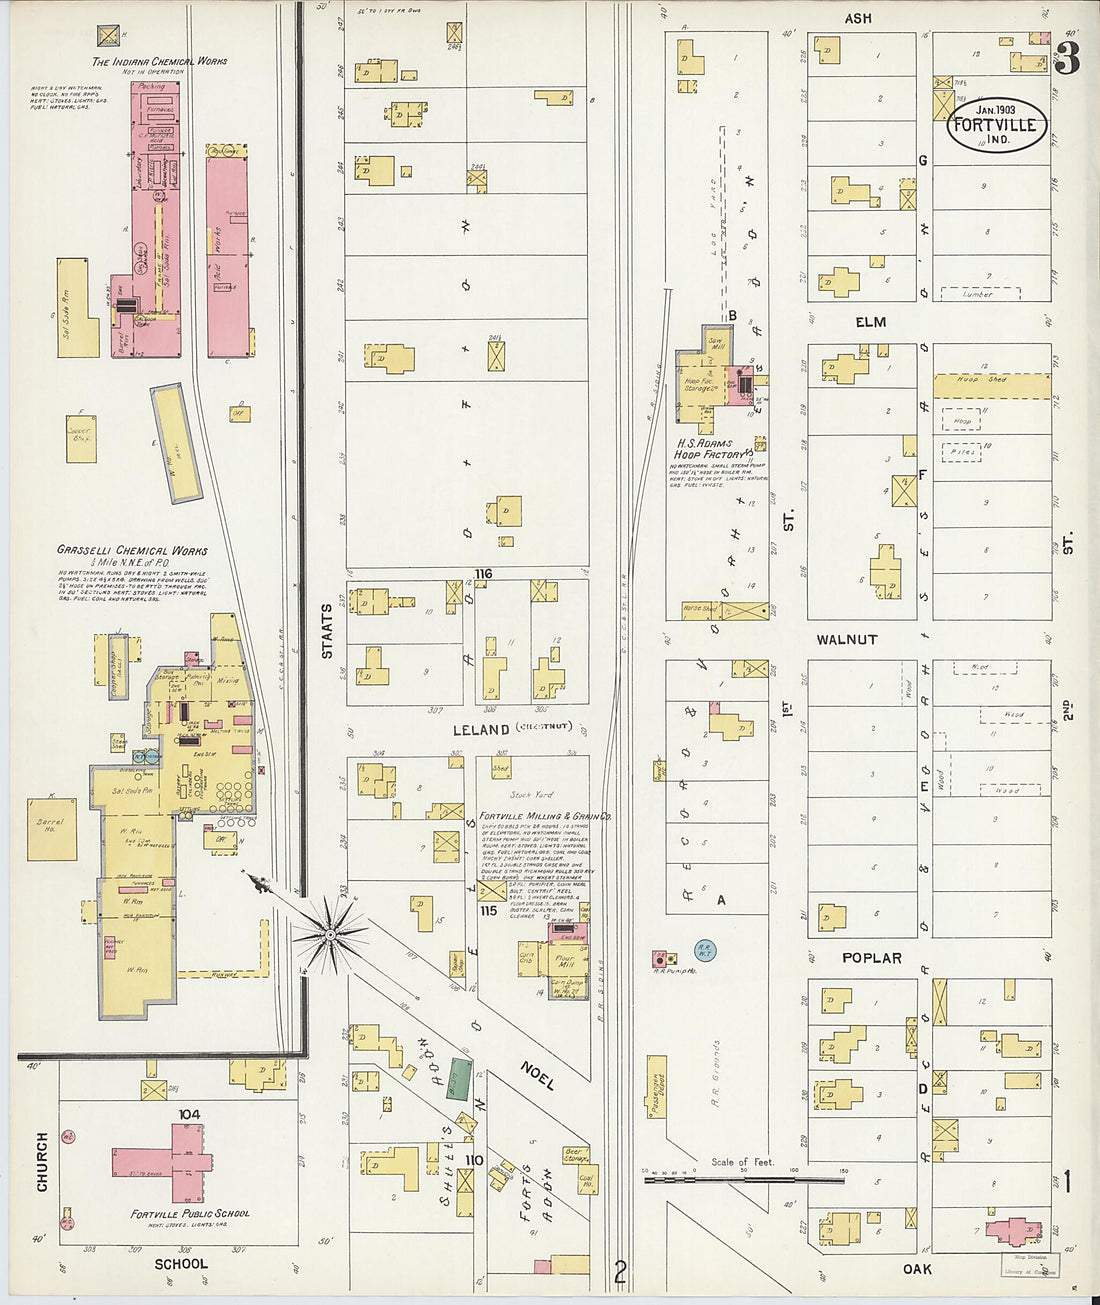 This old map of Fortville, Hancock County, Indiana was created by Sanborn Map Company in 1903